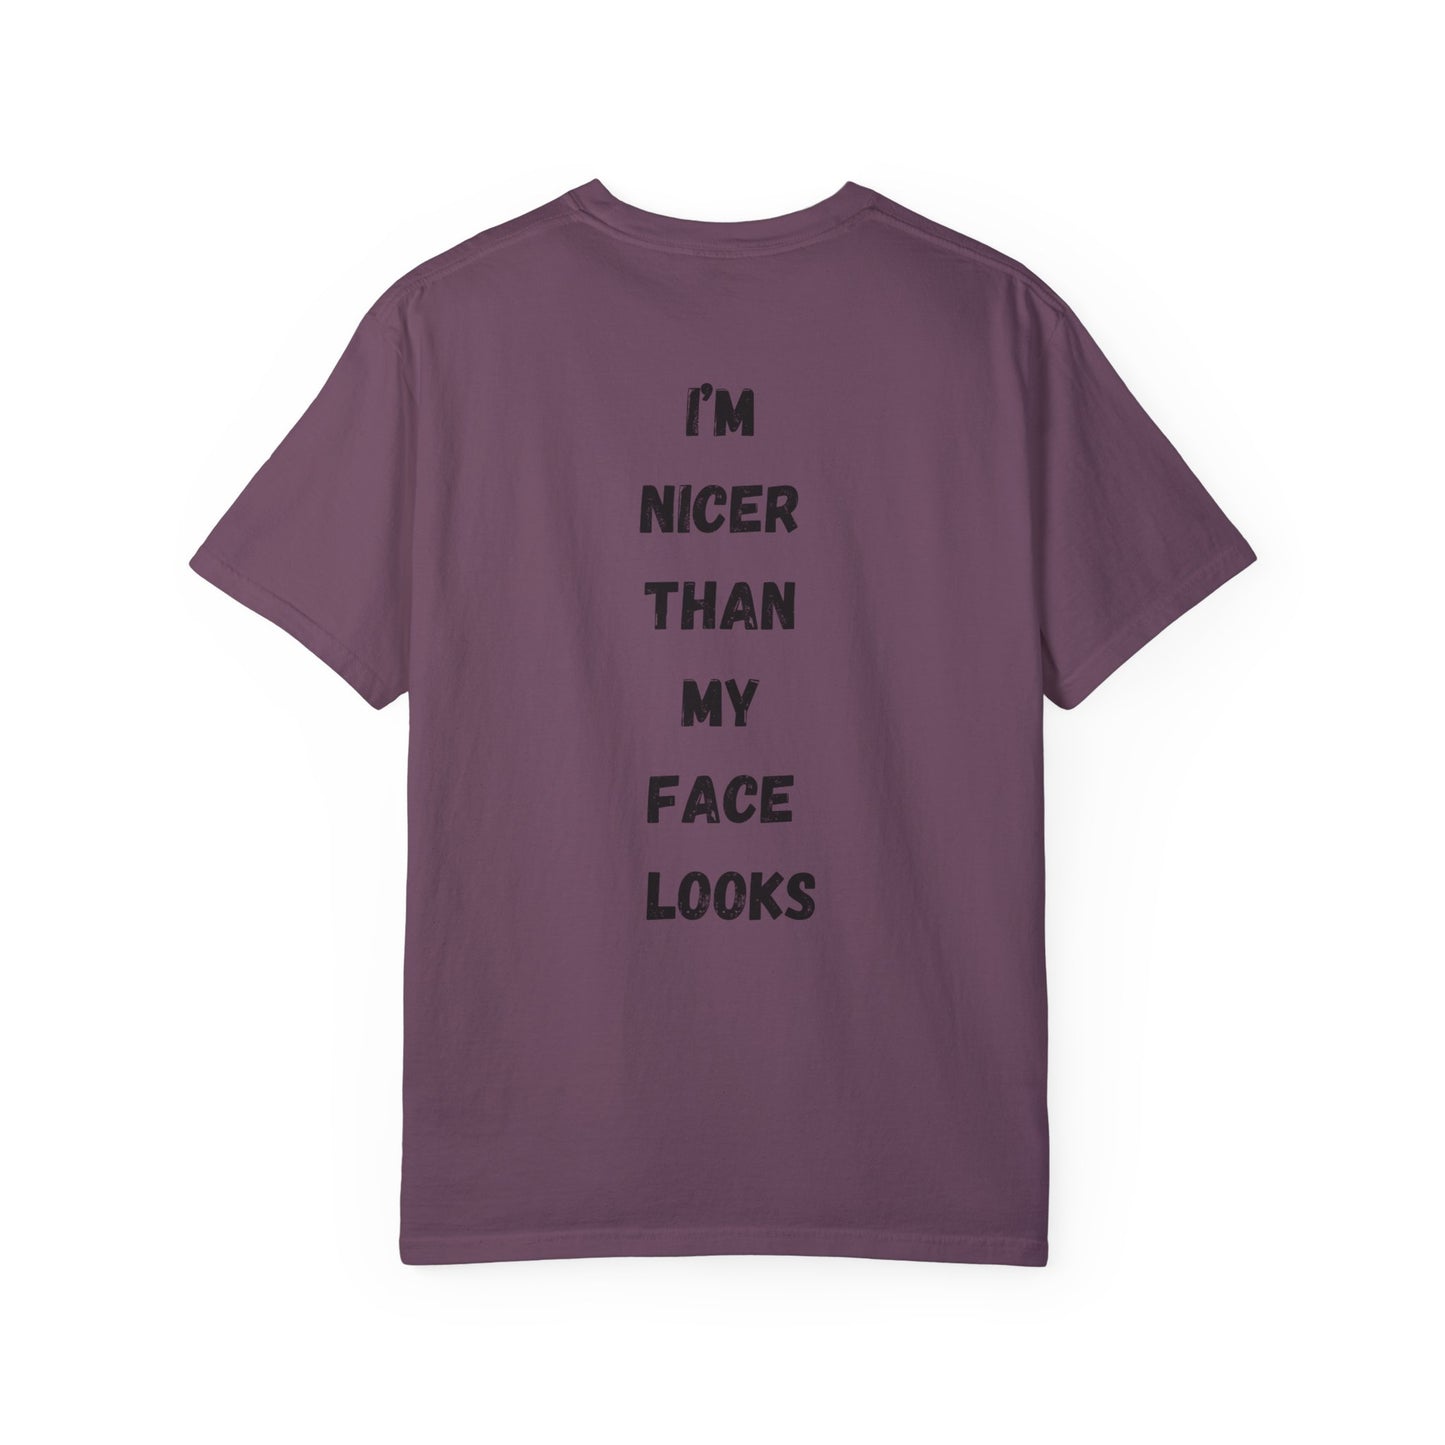 I'm Nicer Than My Face Looks T-Shirt Funny Sarcastic Men Women Shirt Smiley Face Preppy Tshirt Hoodie Oversize Comfort Colors Shirt